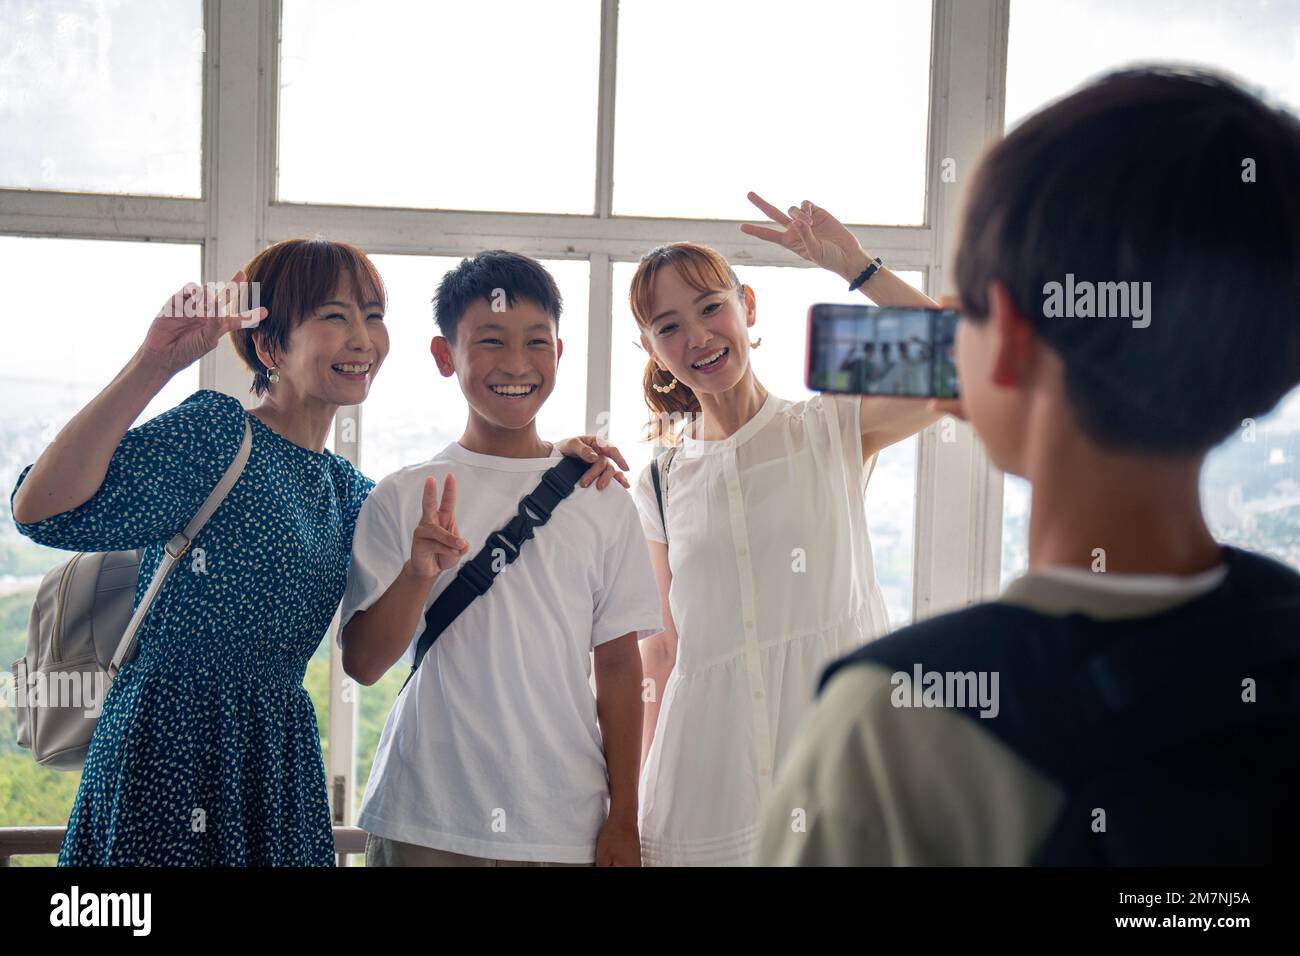 A boy using his mobile phone to take a picture of three Japanese people, a 13 year old boy, his mother and a friend. Stock Photo